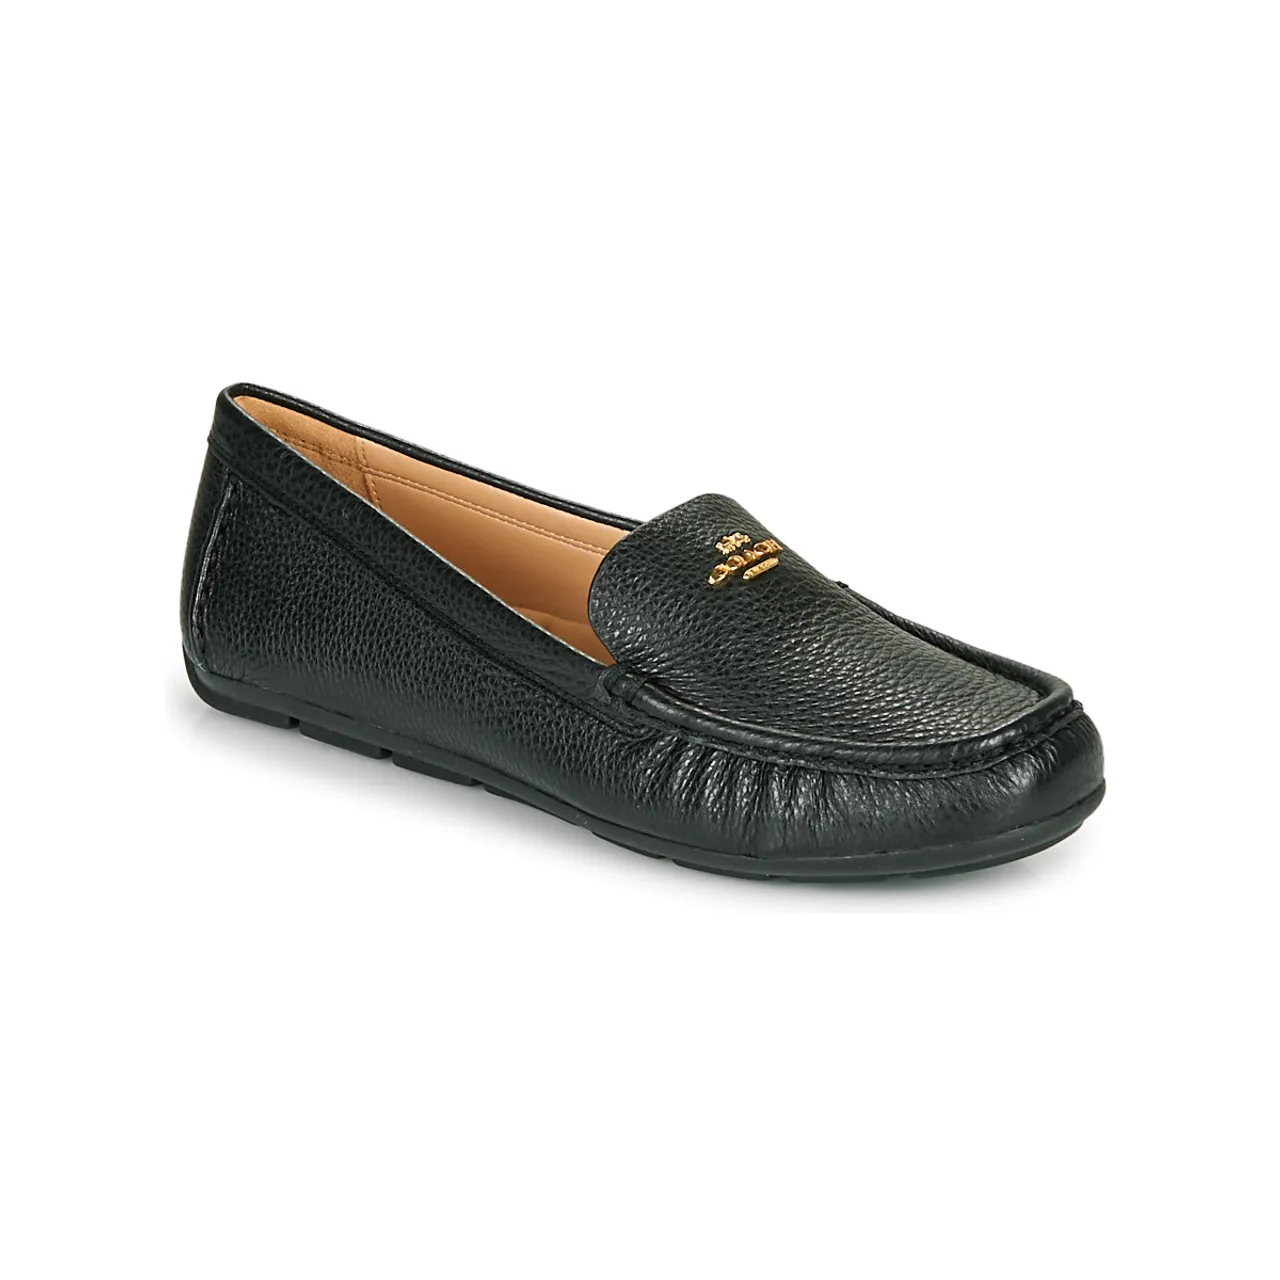 Coach  MARLEY  women's Loafers / Casual Shoes in Black